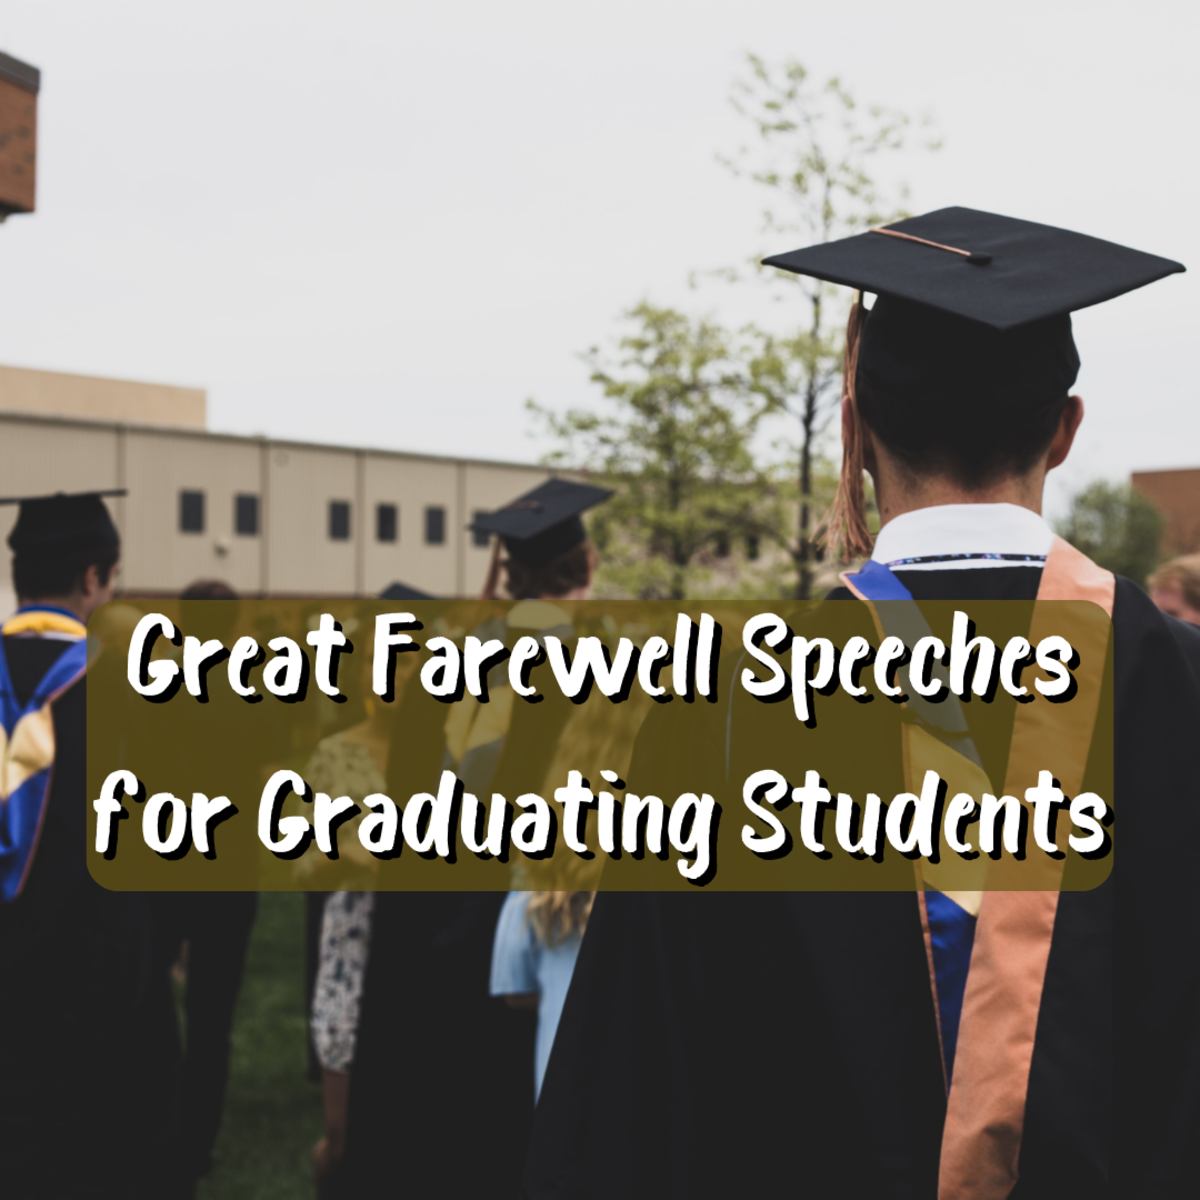 Read on to find the perfect farewell speech to students. Graduation is a bittersweet moment, but this article will provide you with some helpful ideas to send your students off properly.